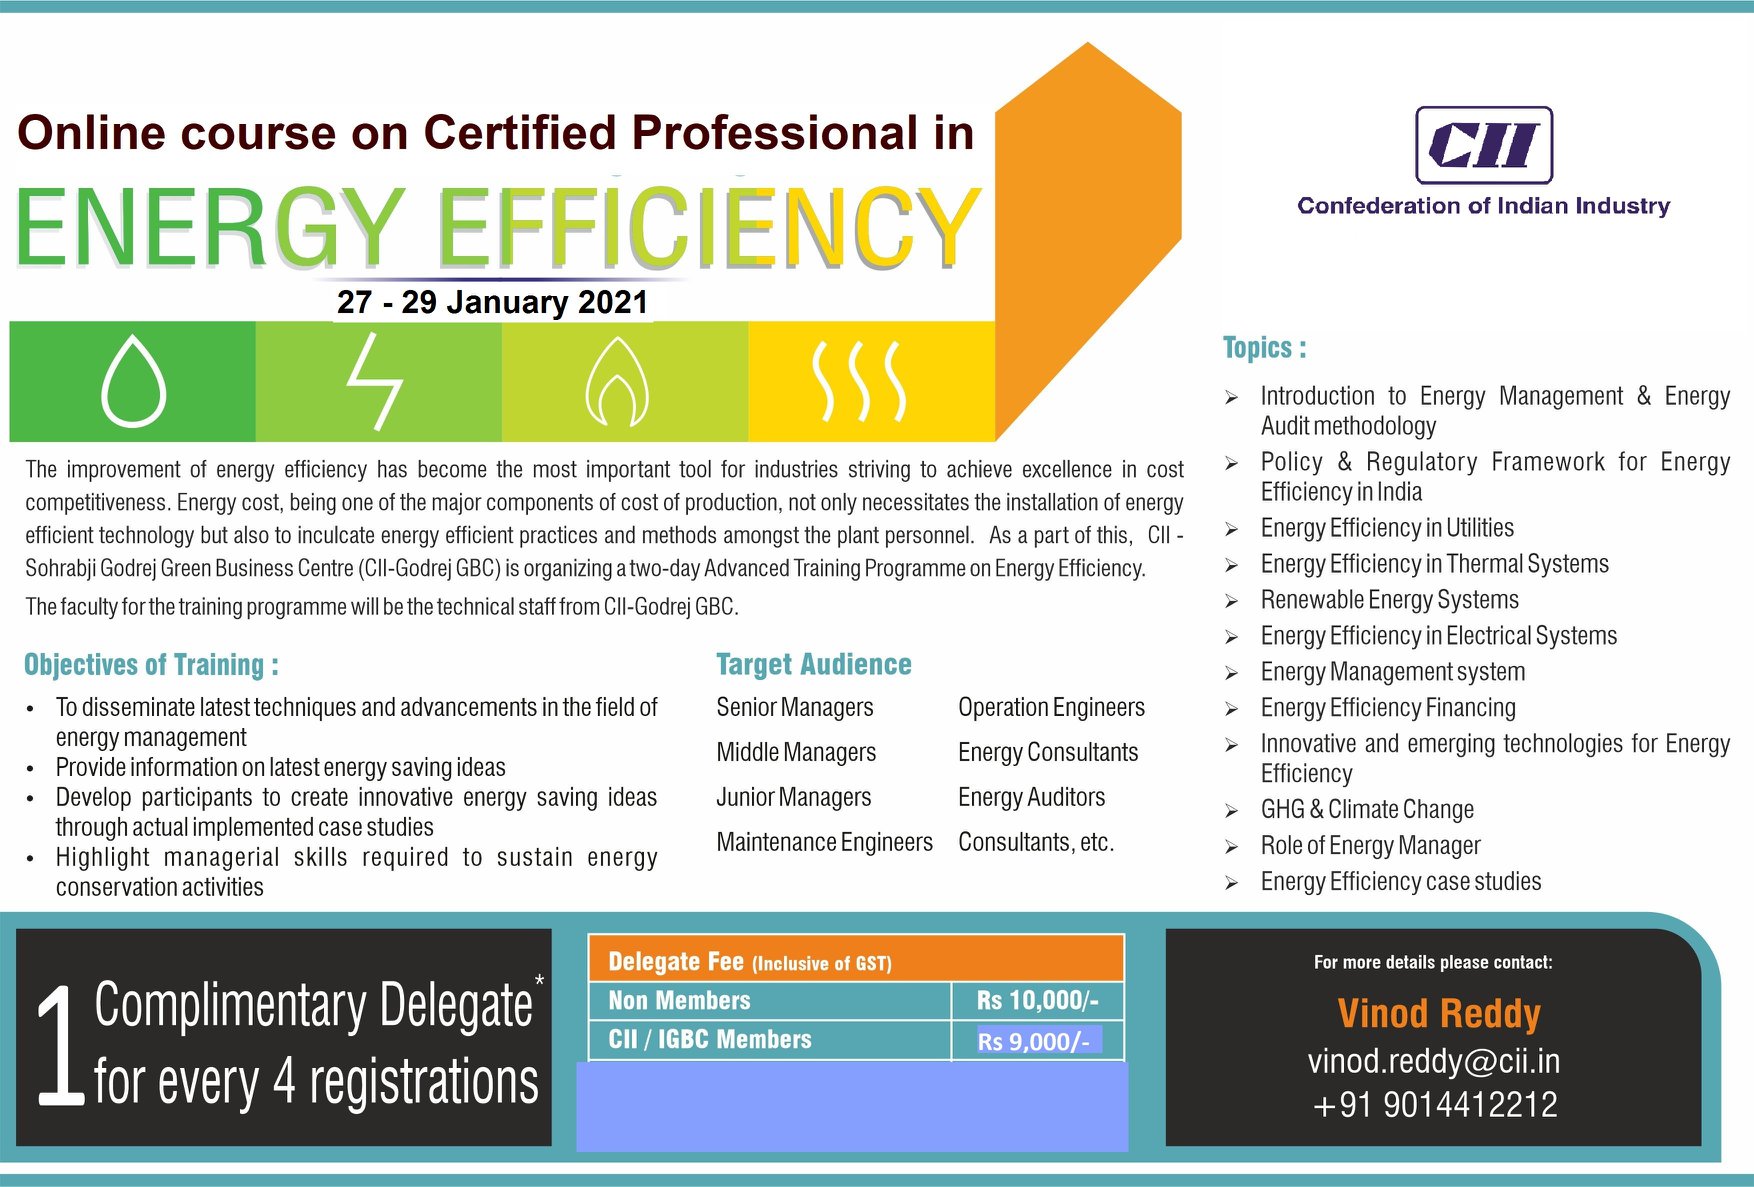 Online course on certified Professional in Energy Efficiency, Hyderabad, Telangana, India